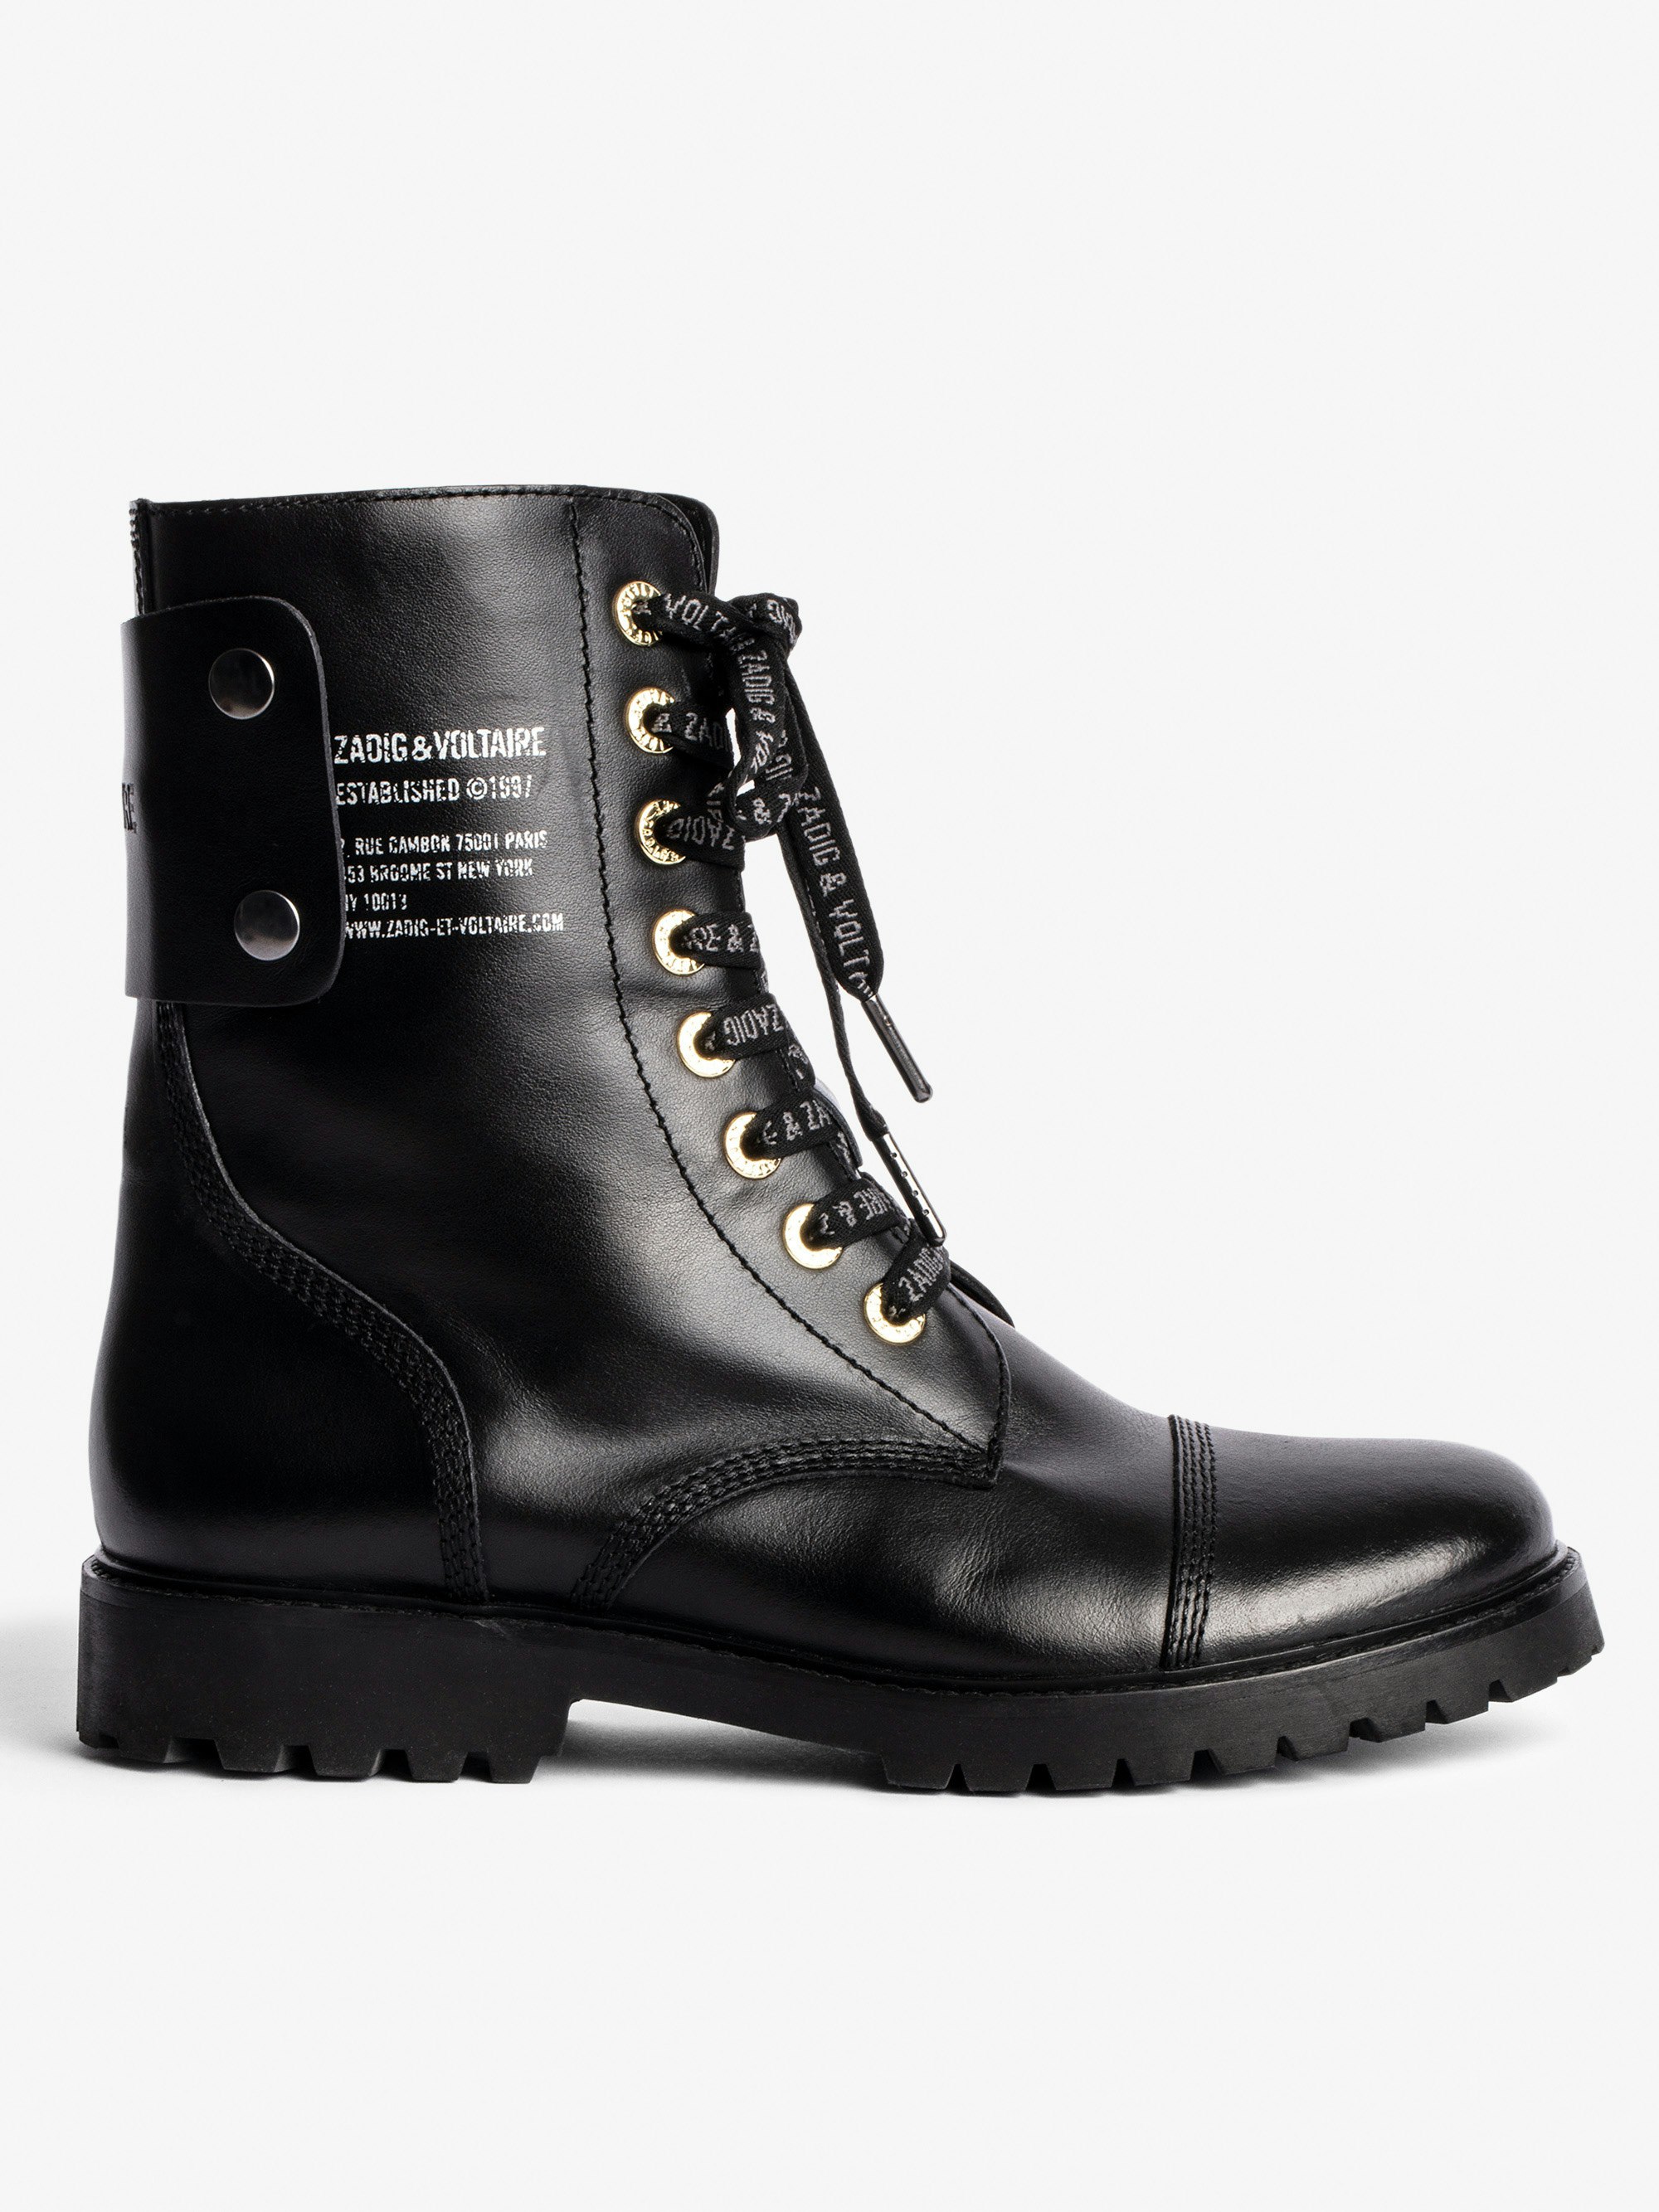 Joe Ankle Boots - Women's black leather boot